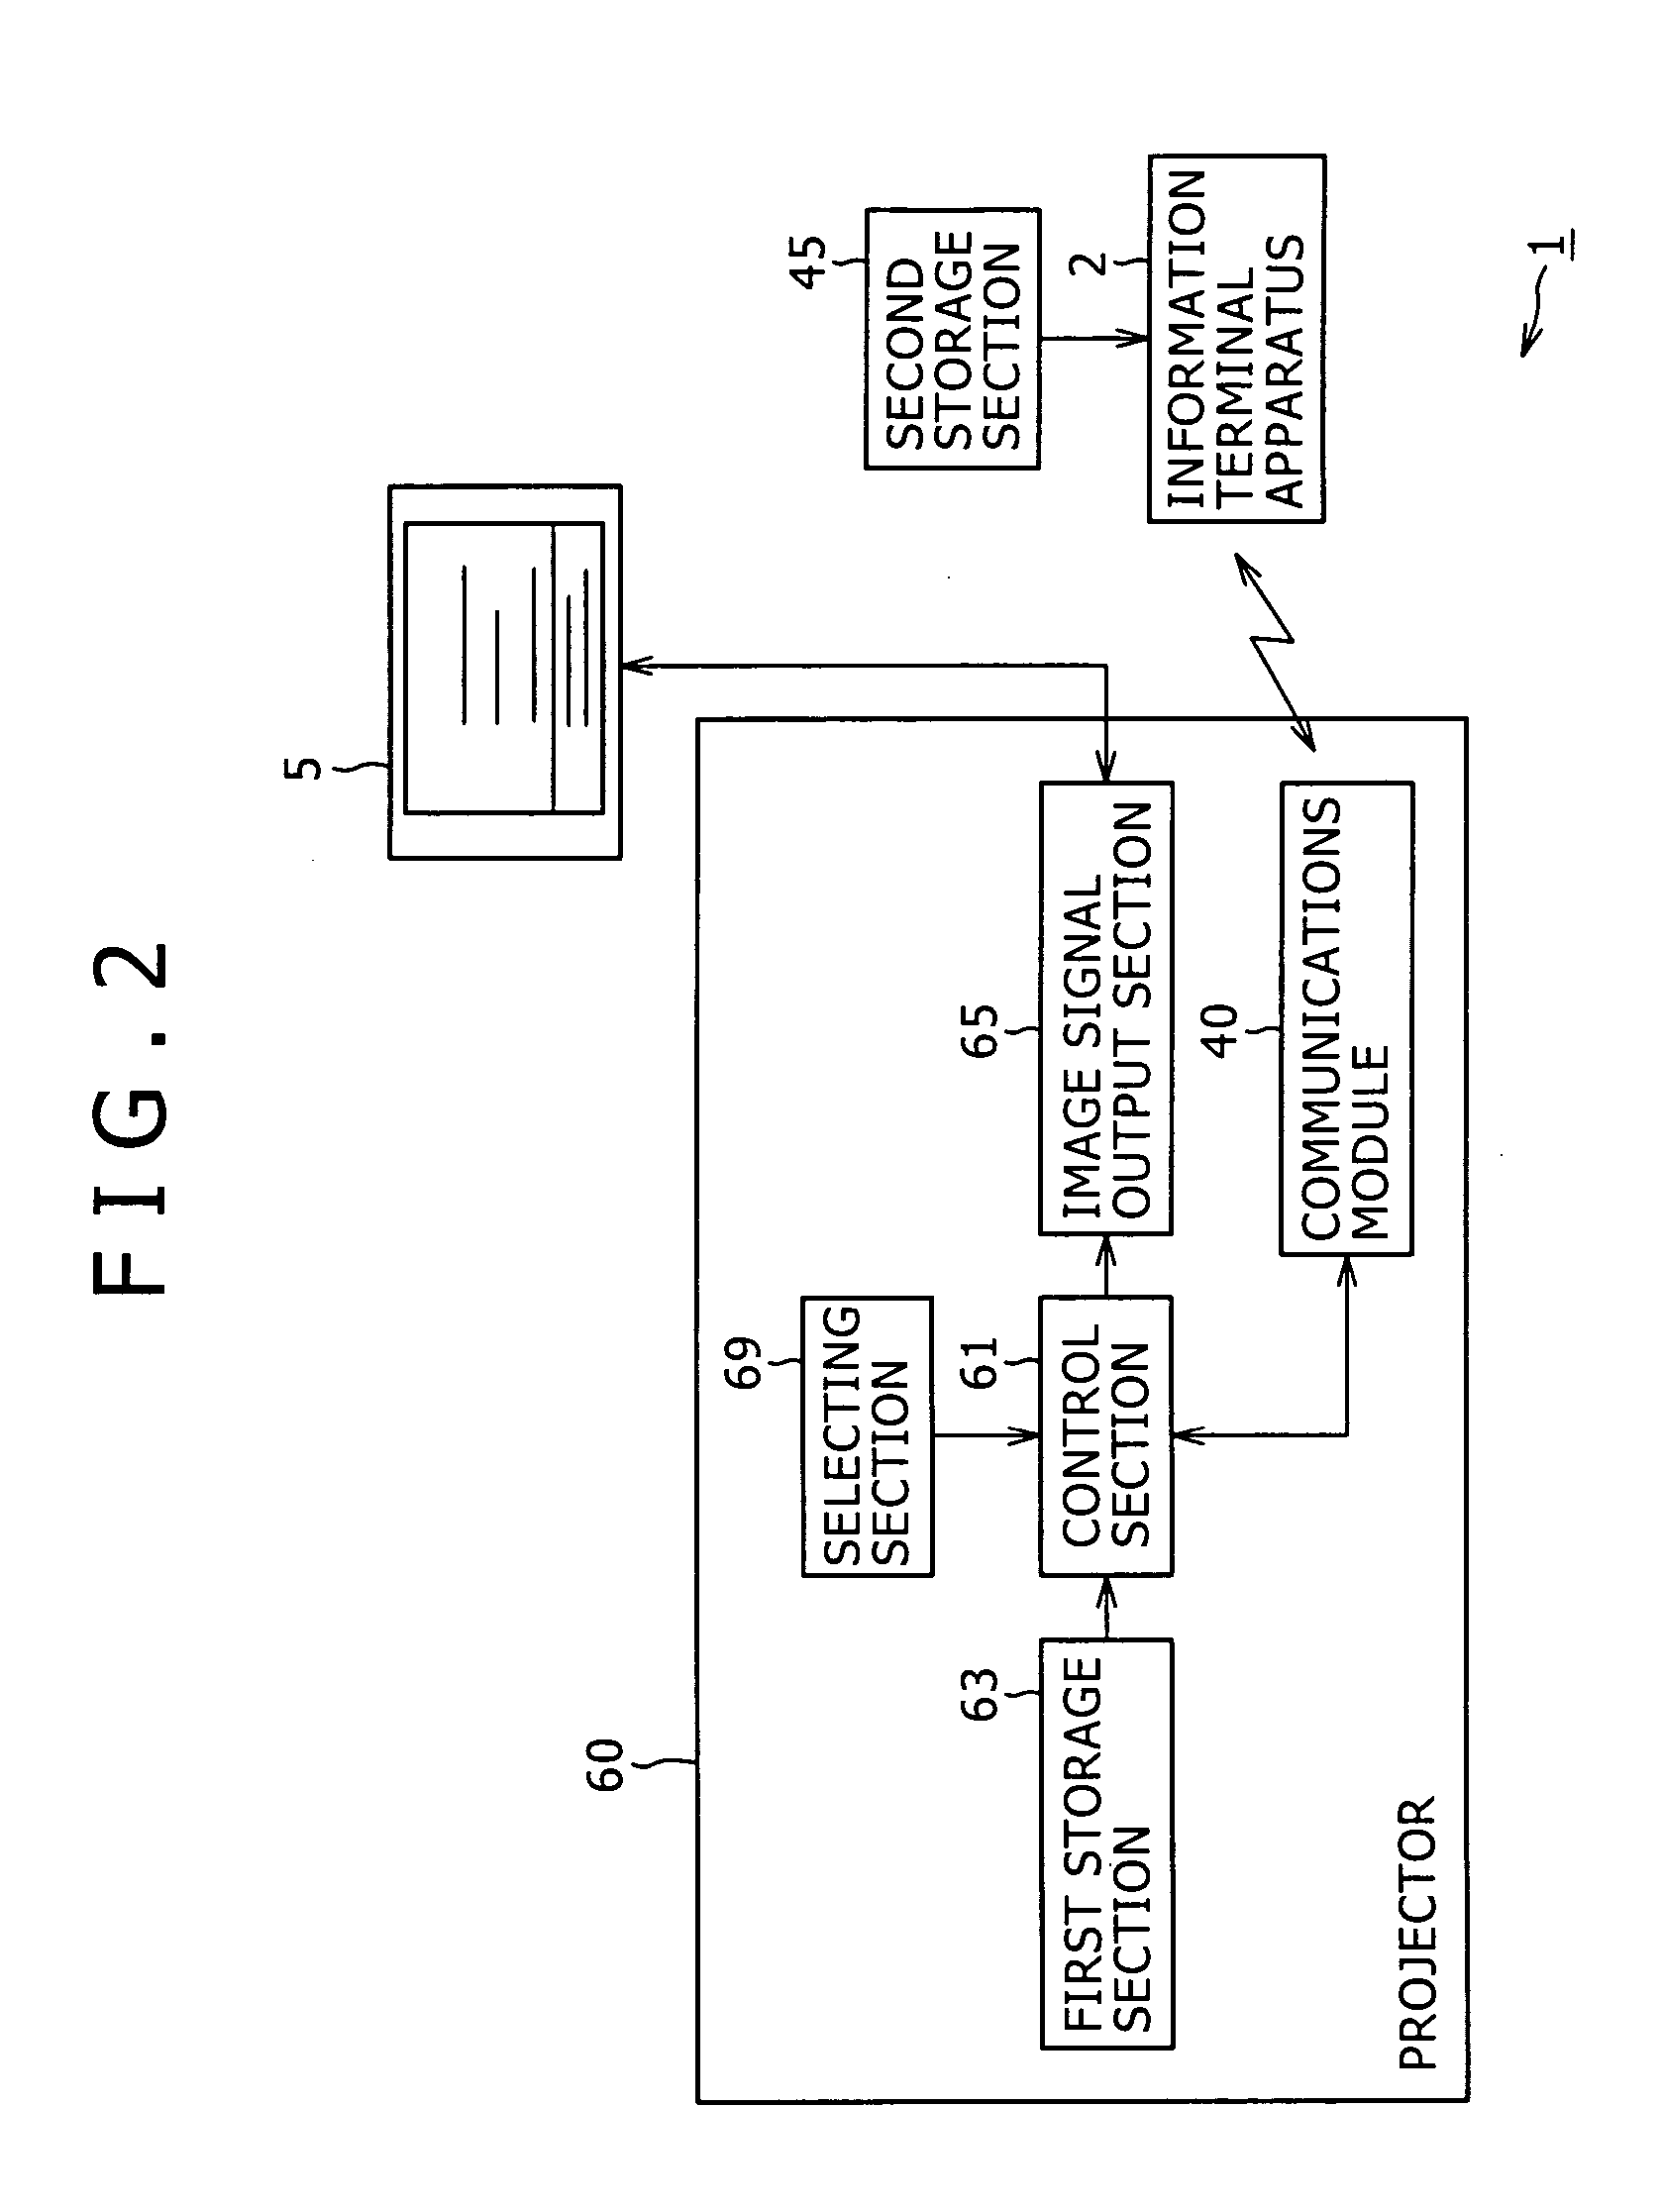 Display apparatus, information terminal apparatus, network system, and network configuring method